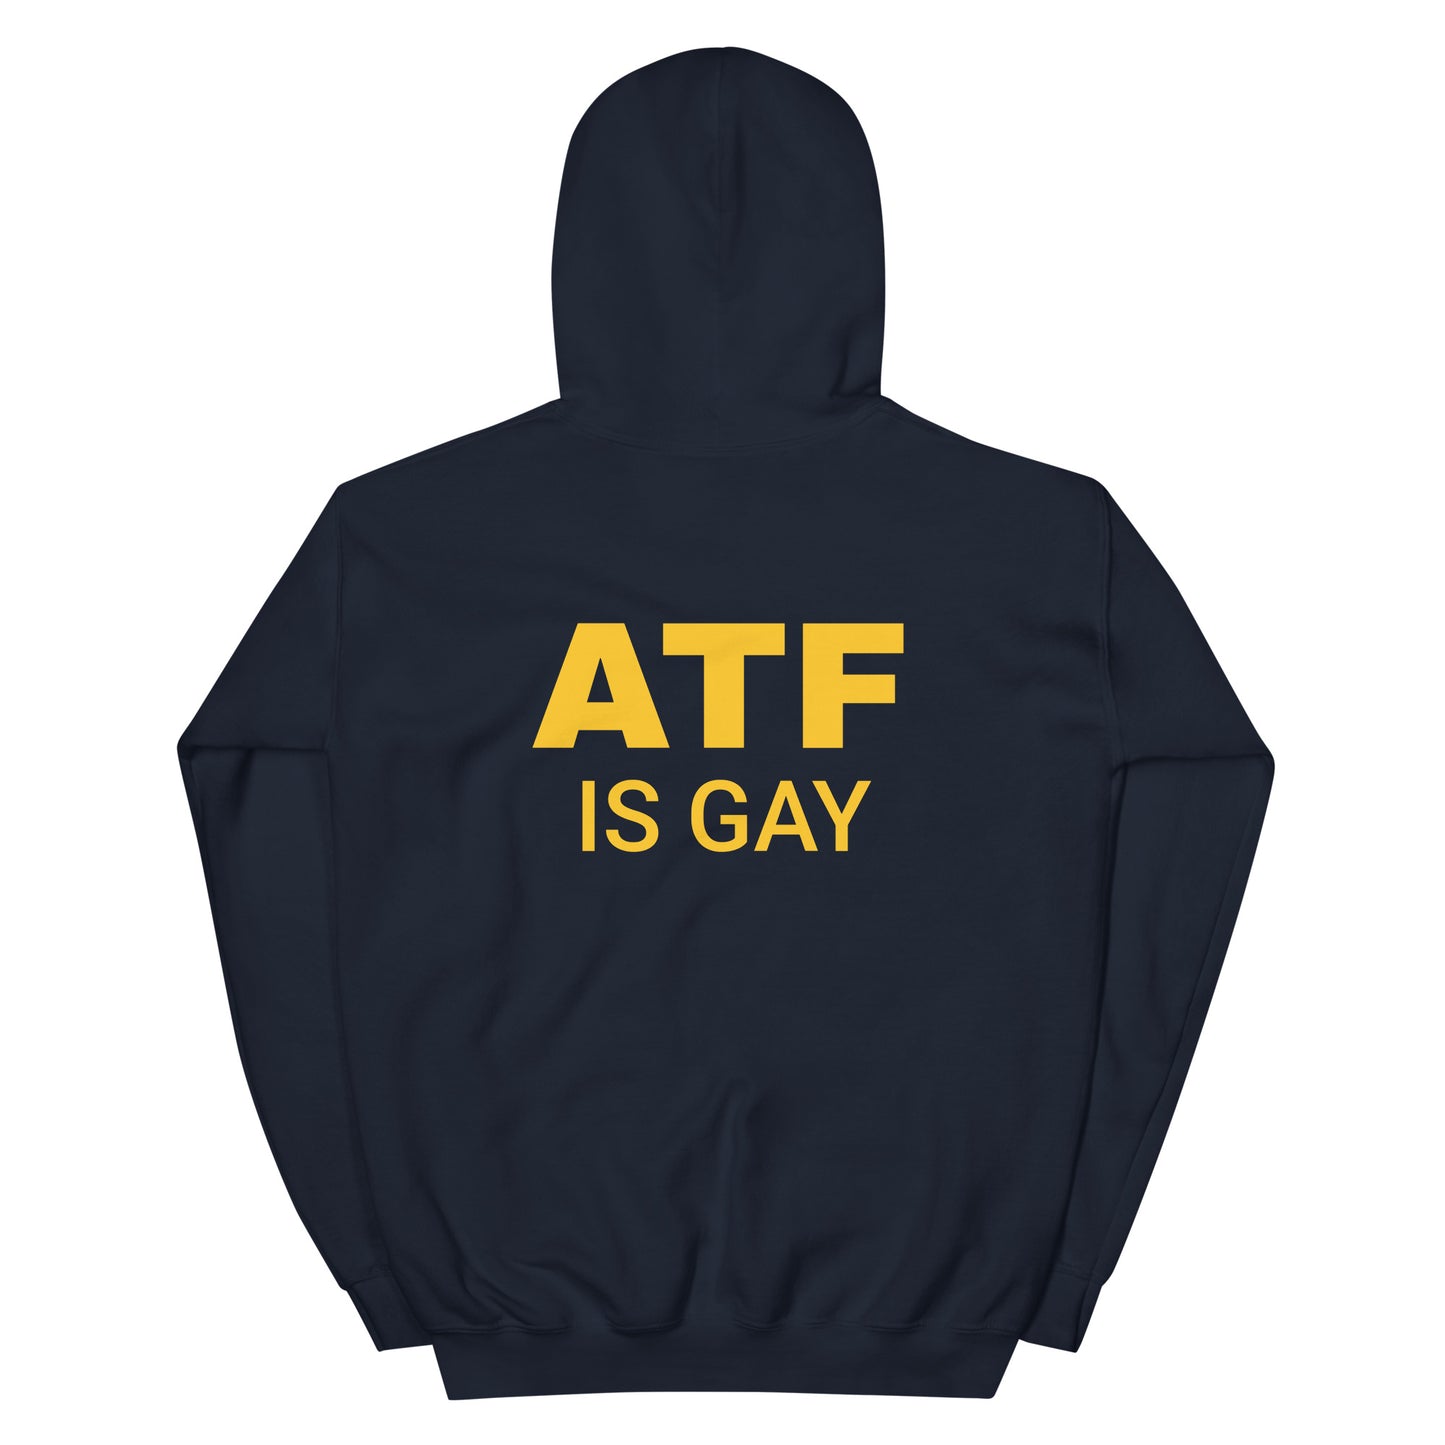 ATF IS GAY